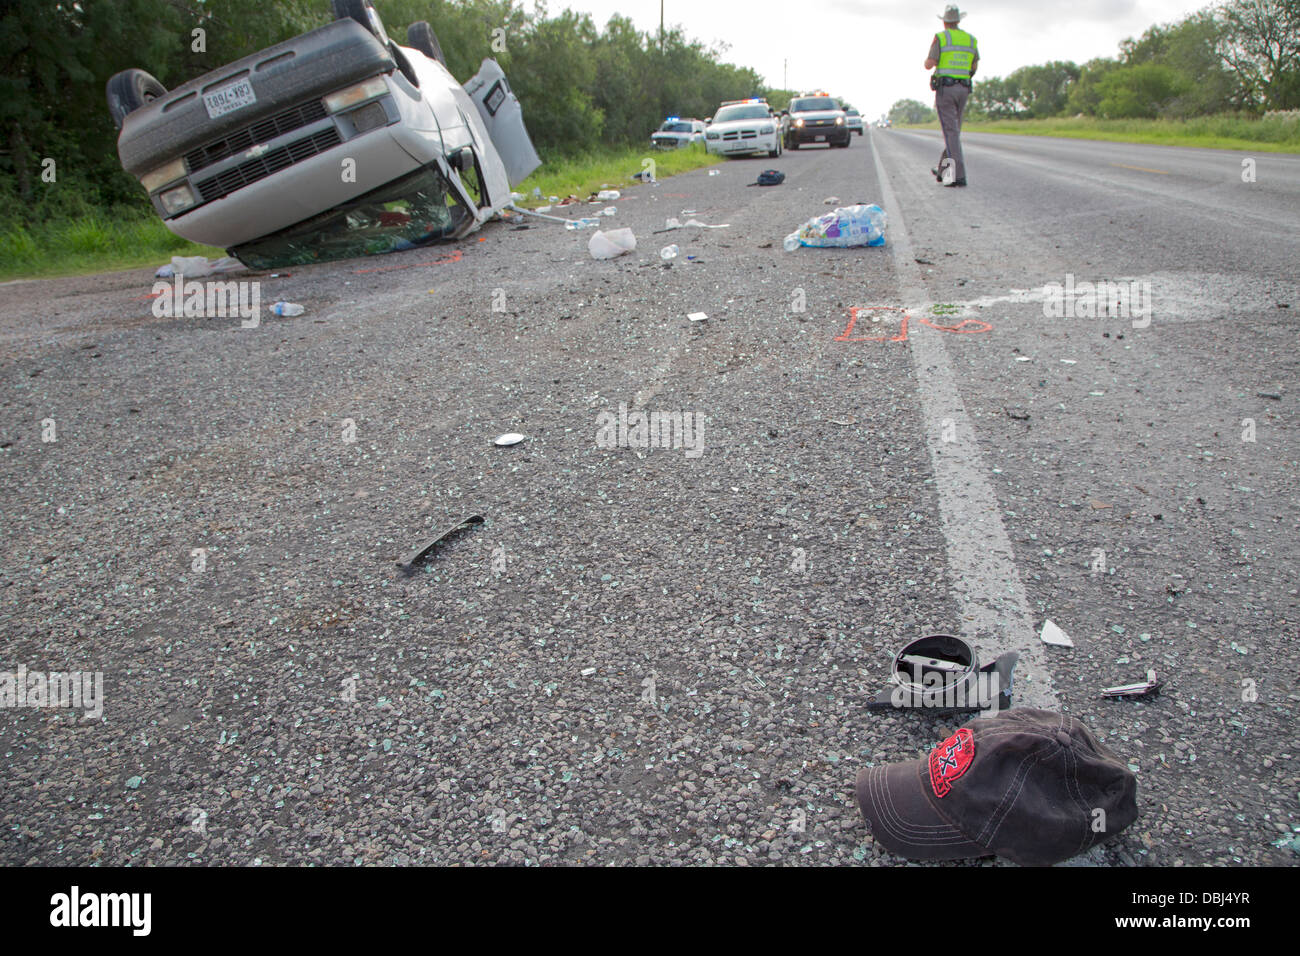 Falfurrias, Texas - An van holding 26 undocumented immigrants from Central America overturned on Texas Highway 285. Stock Photo